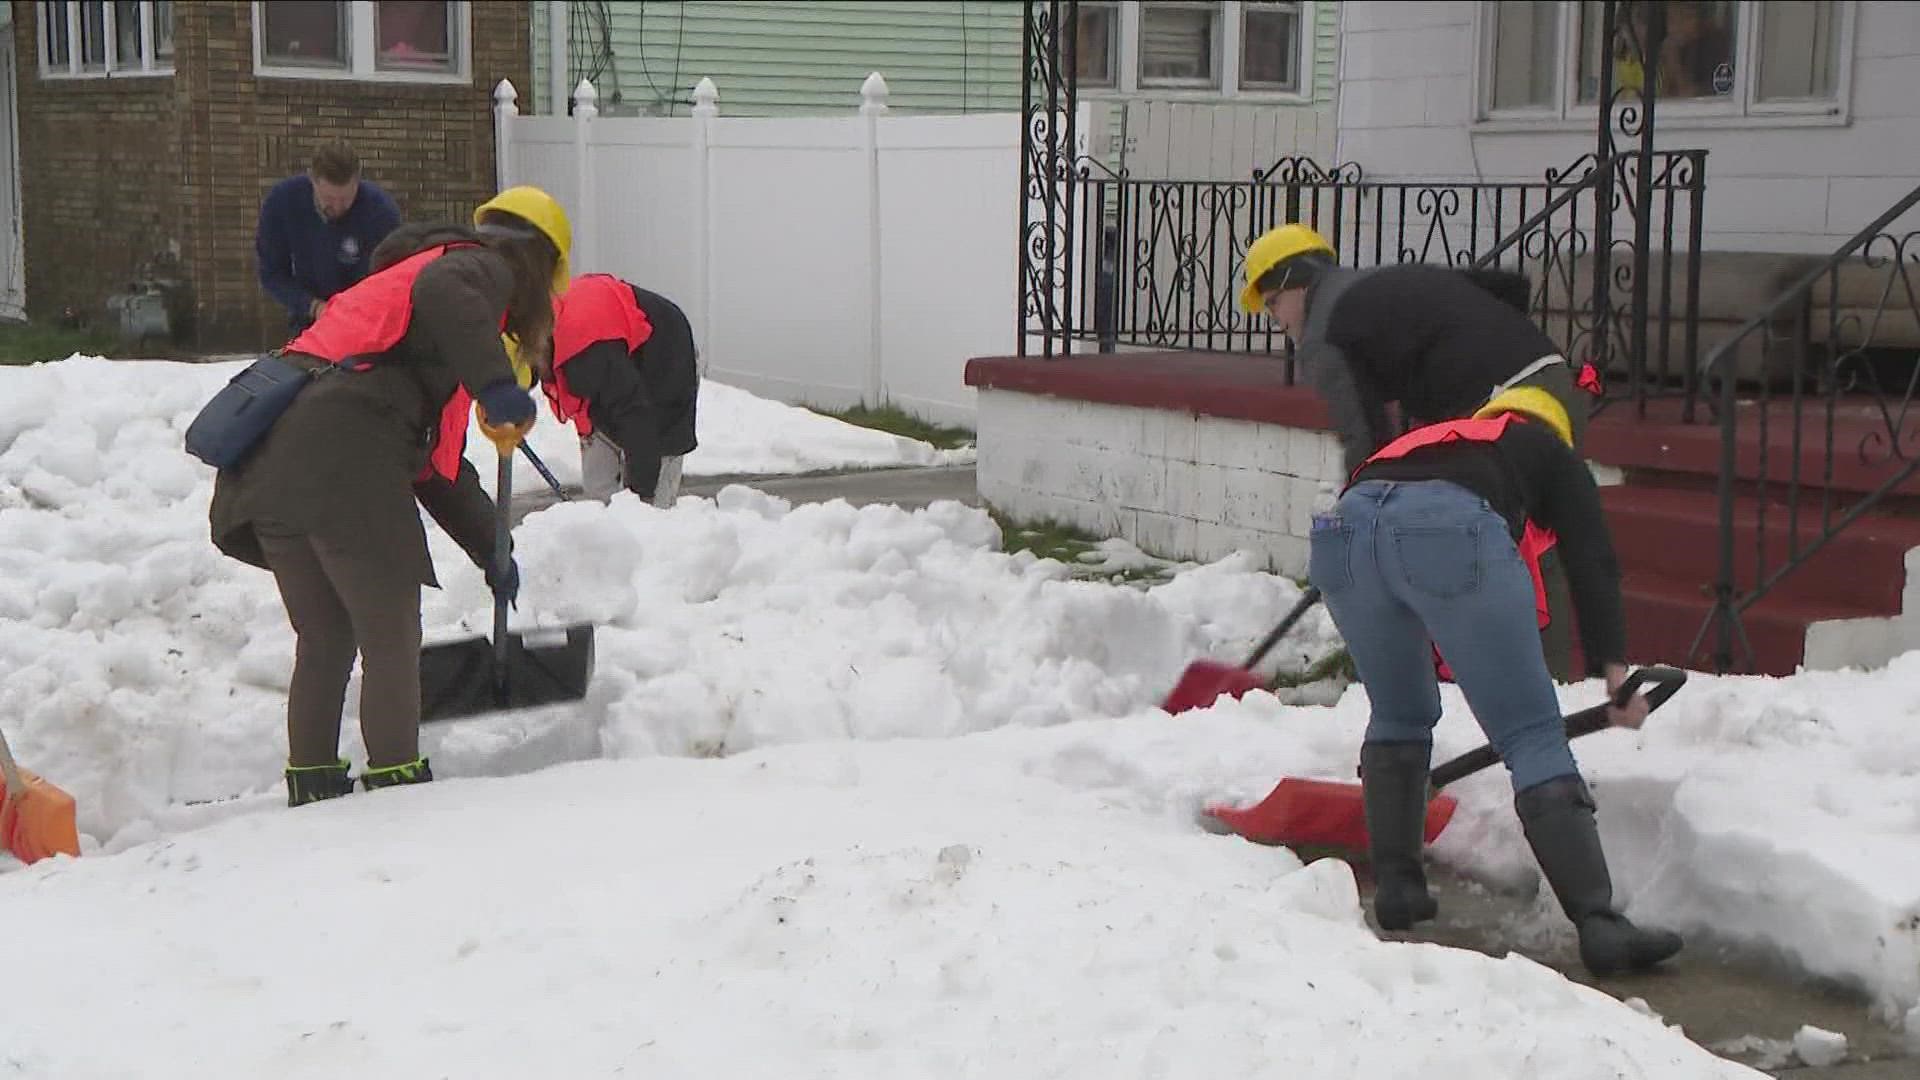 state employee volunteers, from parks and other agencies joined D.O.T. workers....bringing shovels, snow blowers and other equipment to help clear snow.